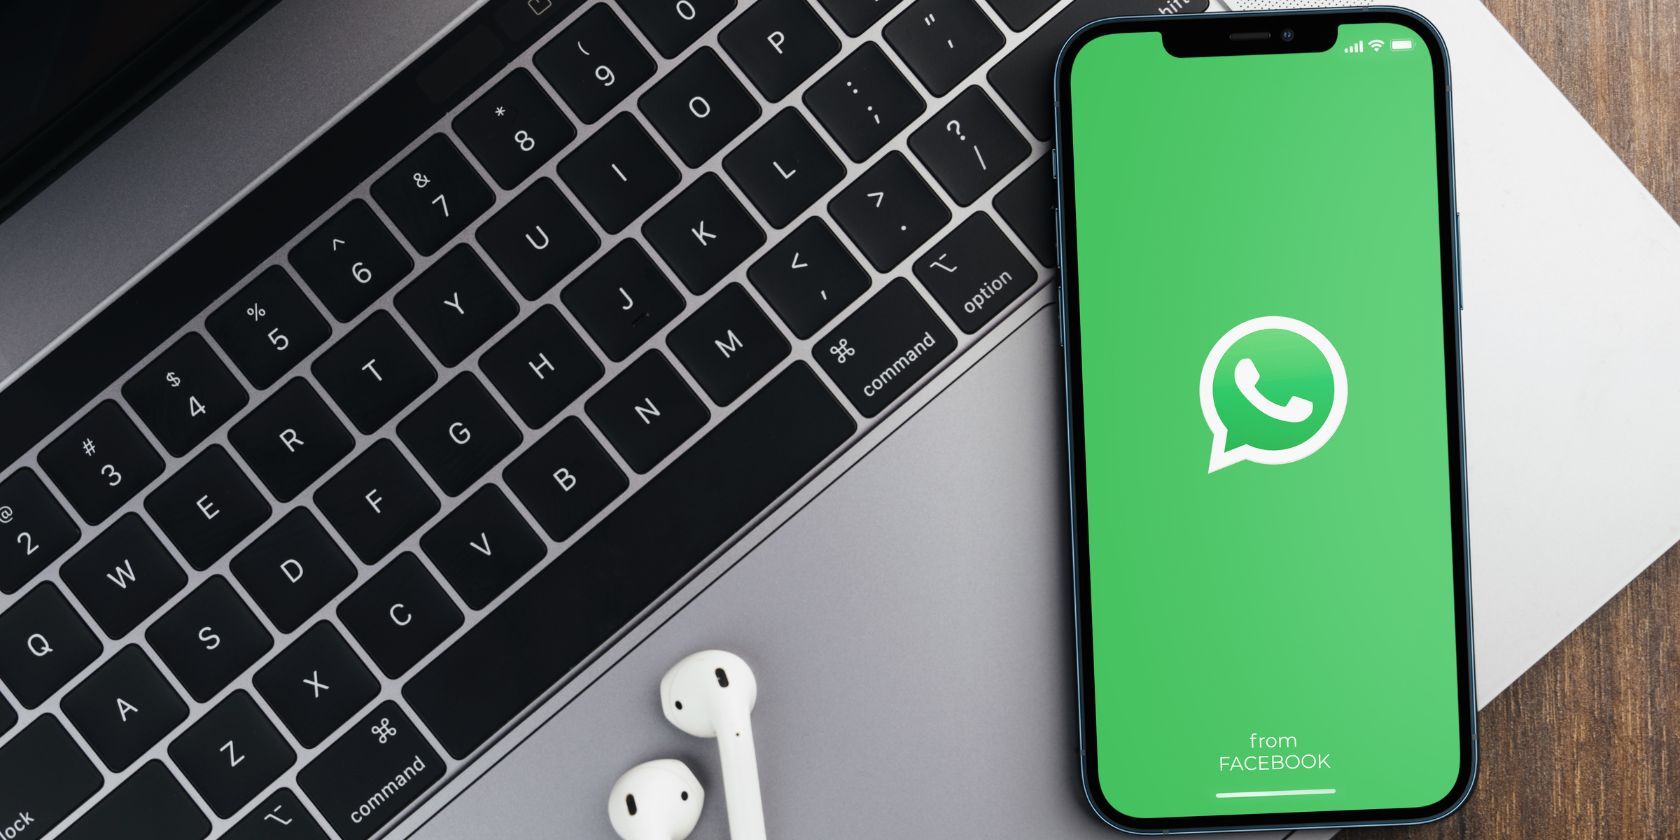 How to Edit Your WhatsApp Messages